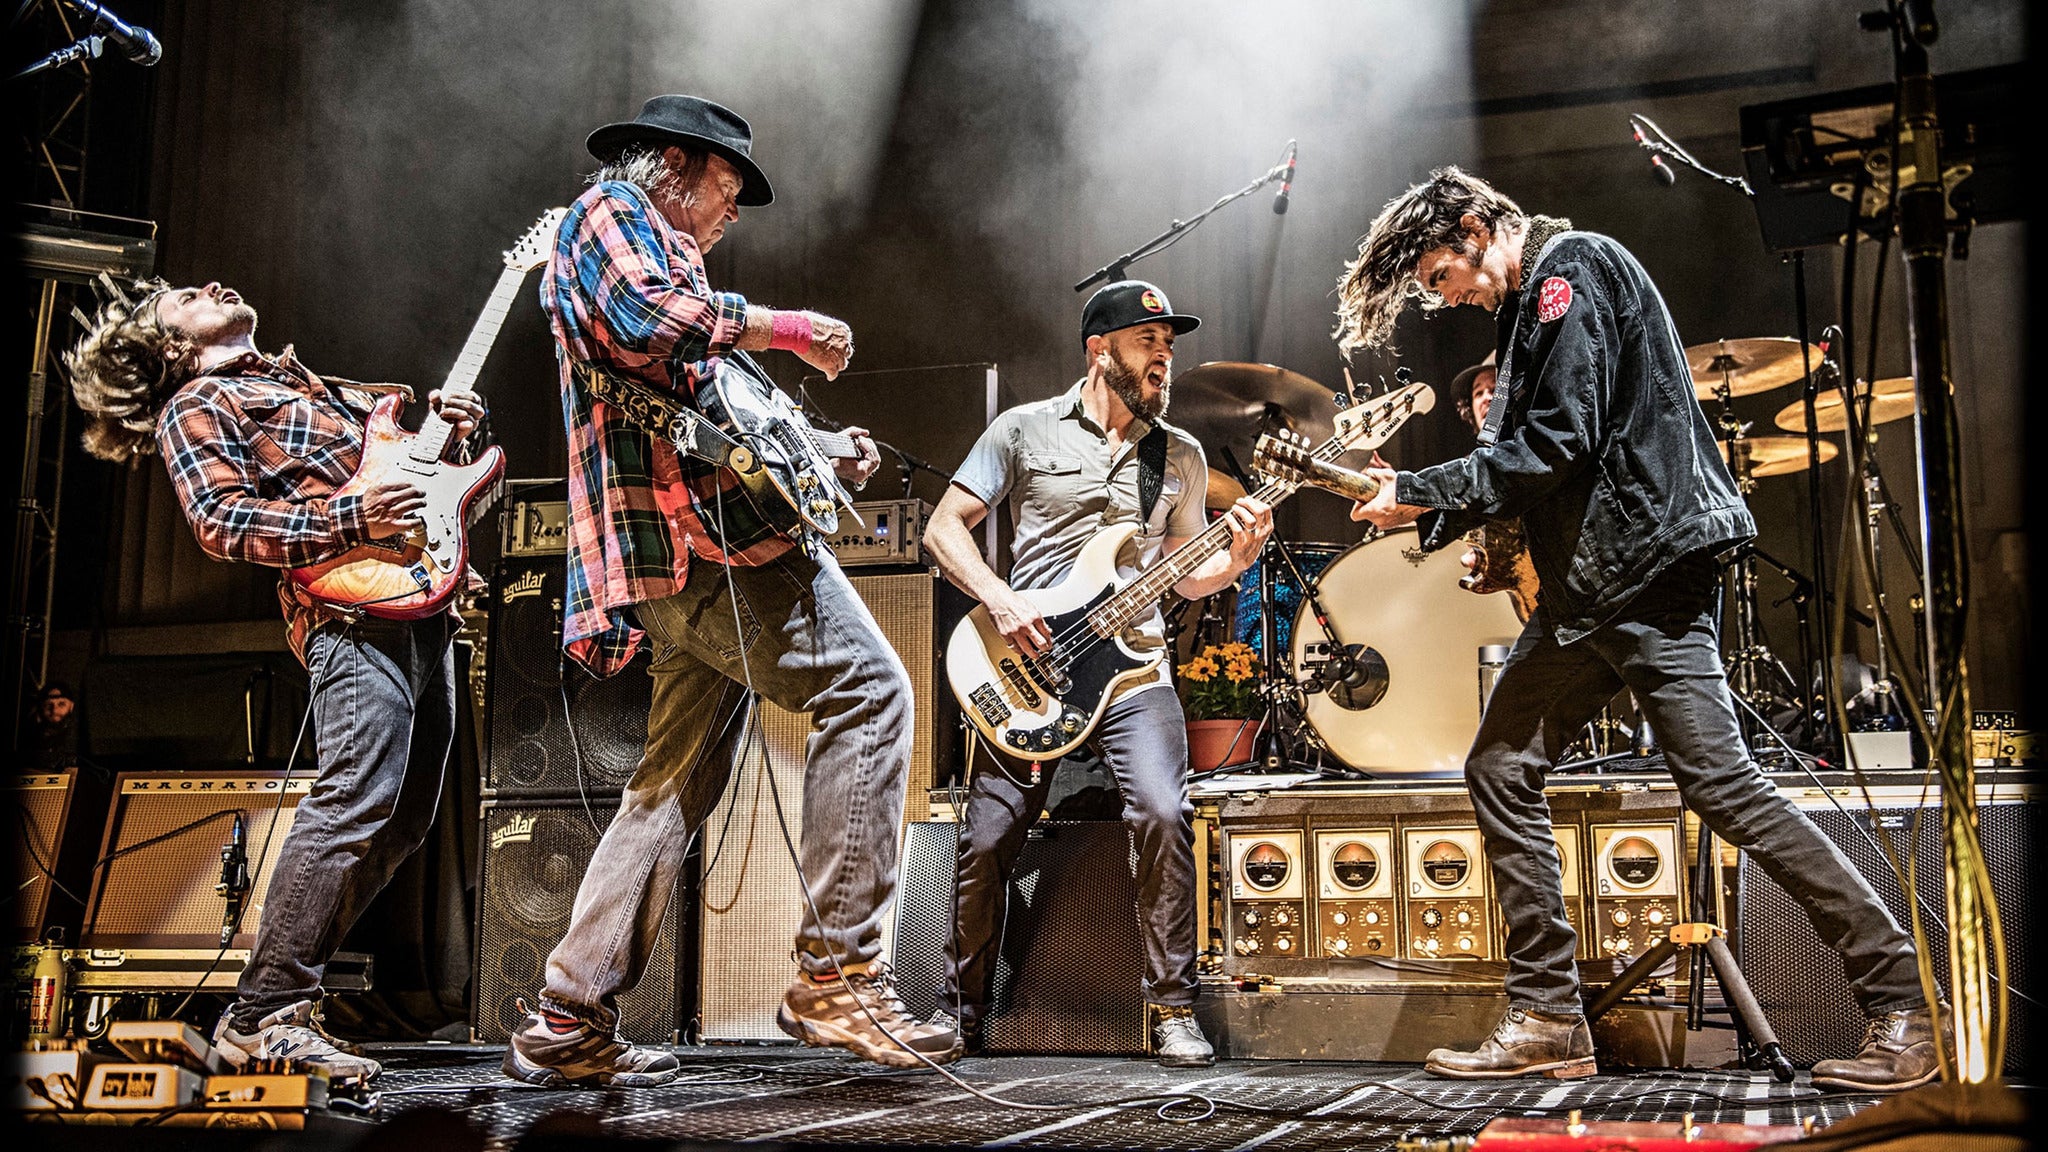 Neil Youngs free presale passcode concert in Los Angeles, CA Jul 13